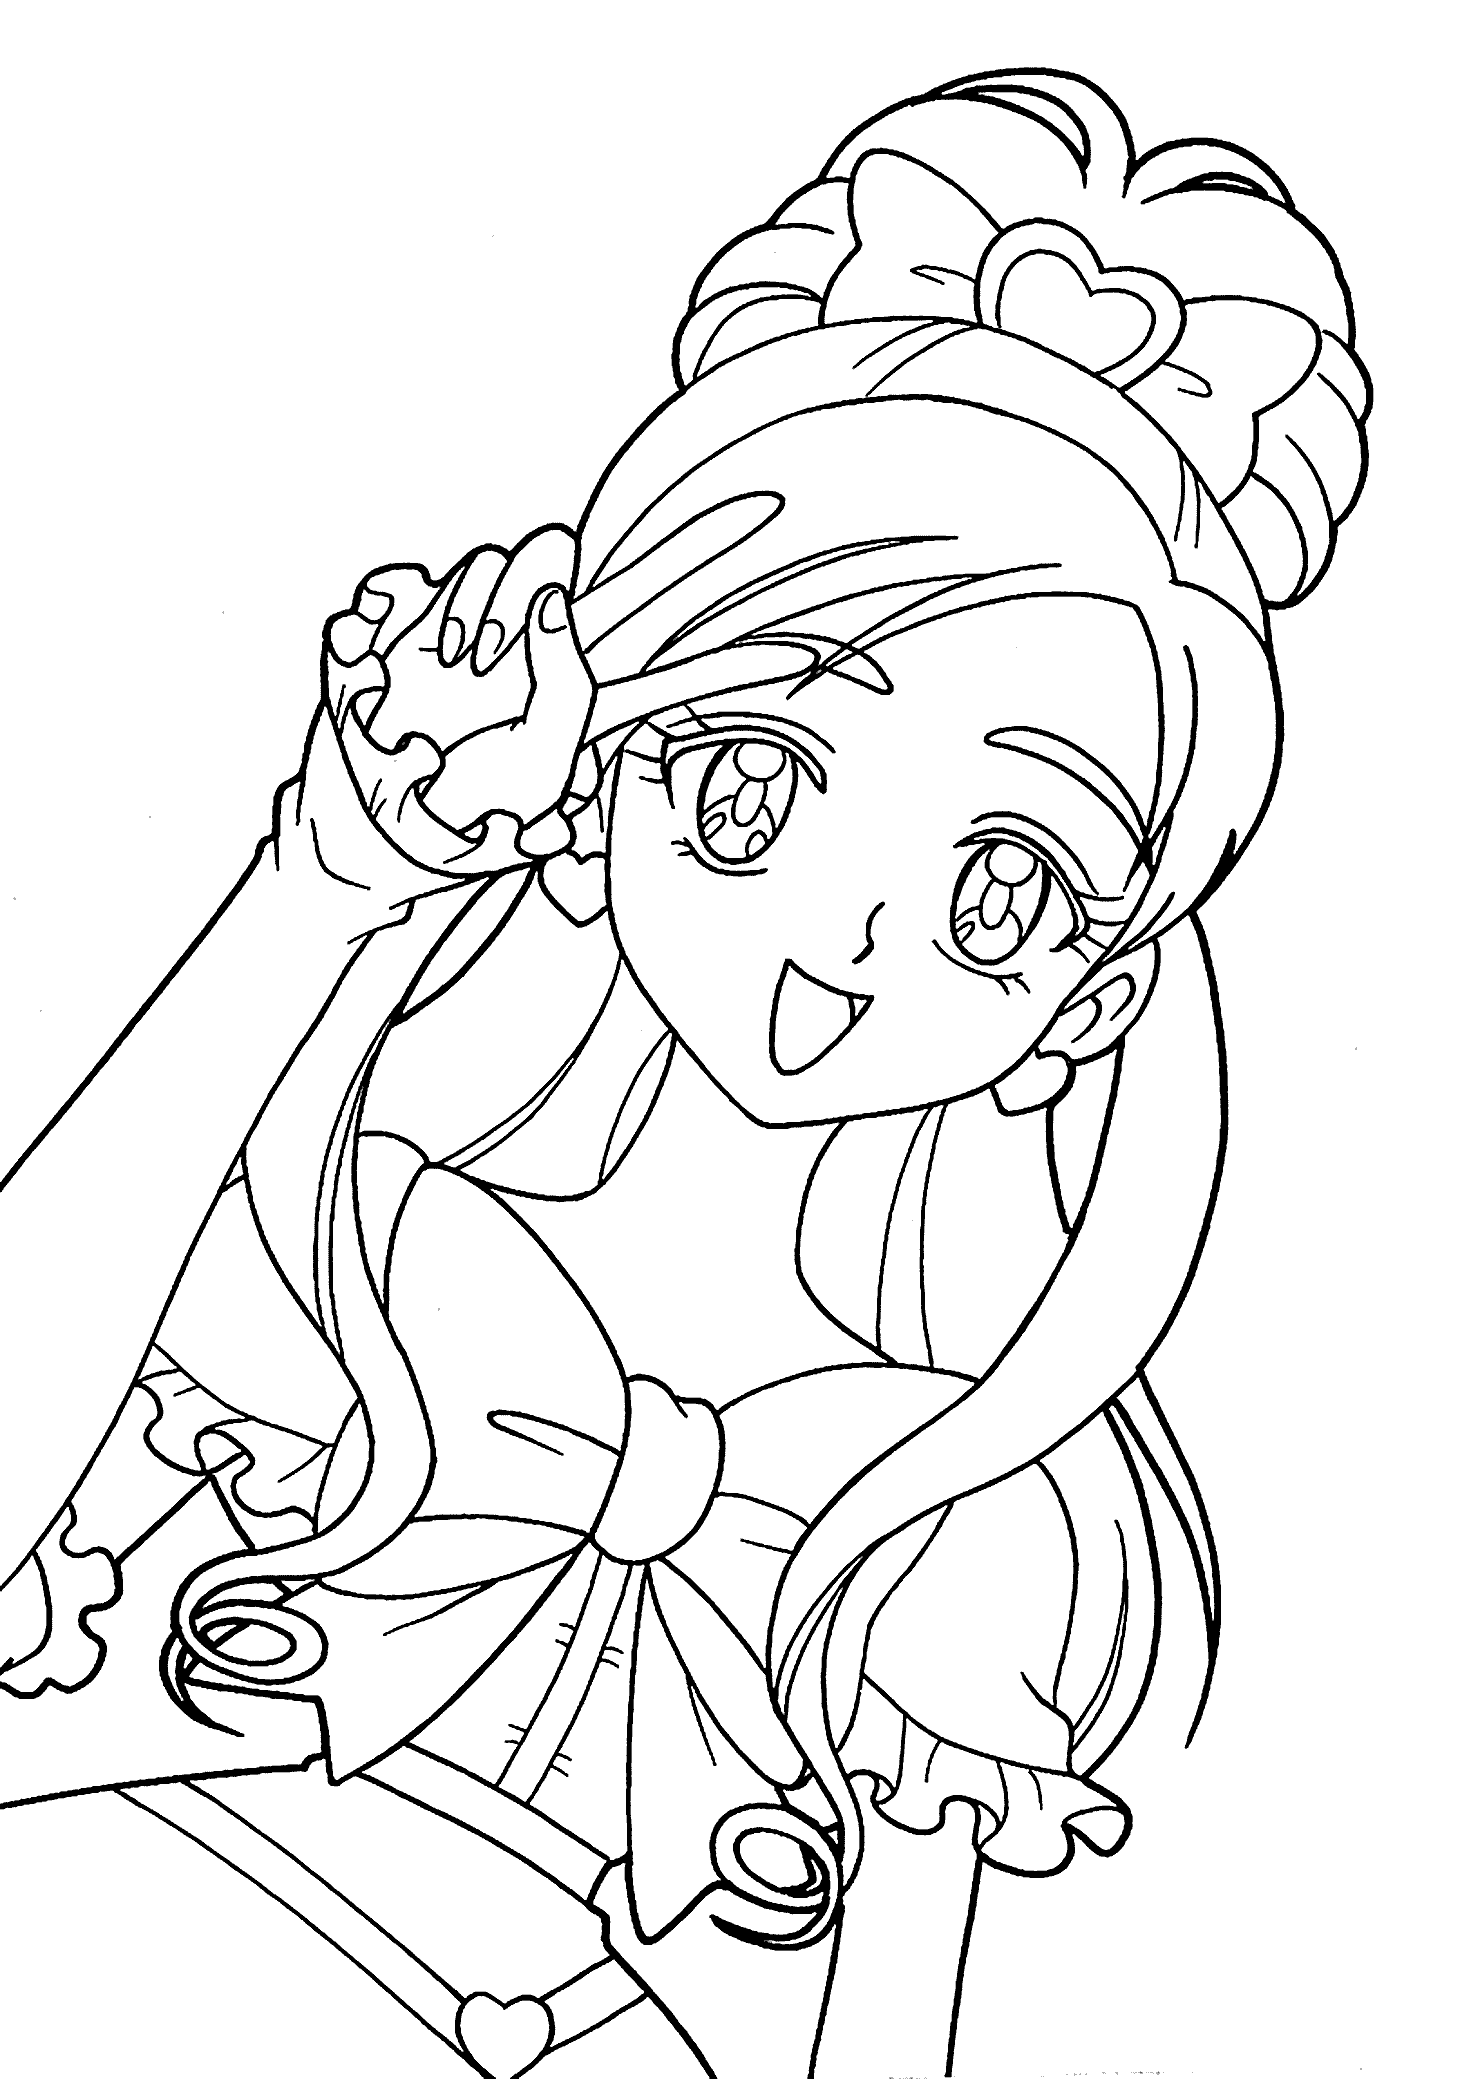 Printable Coloring Pages Of Swd Anime People - Coloring Home